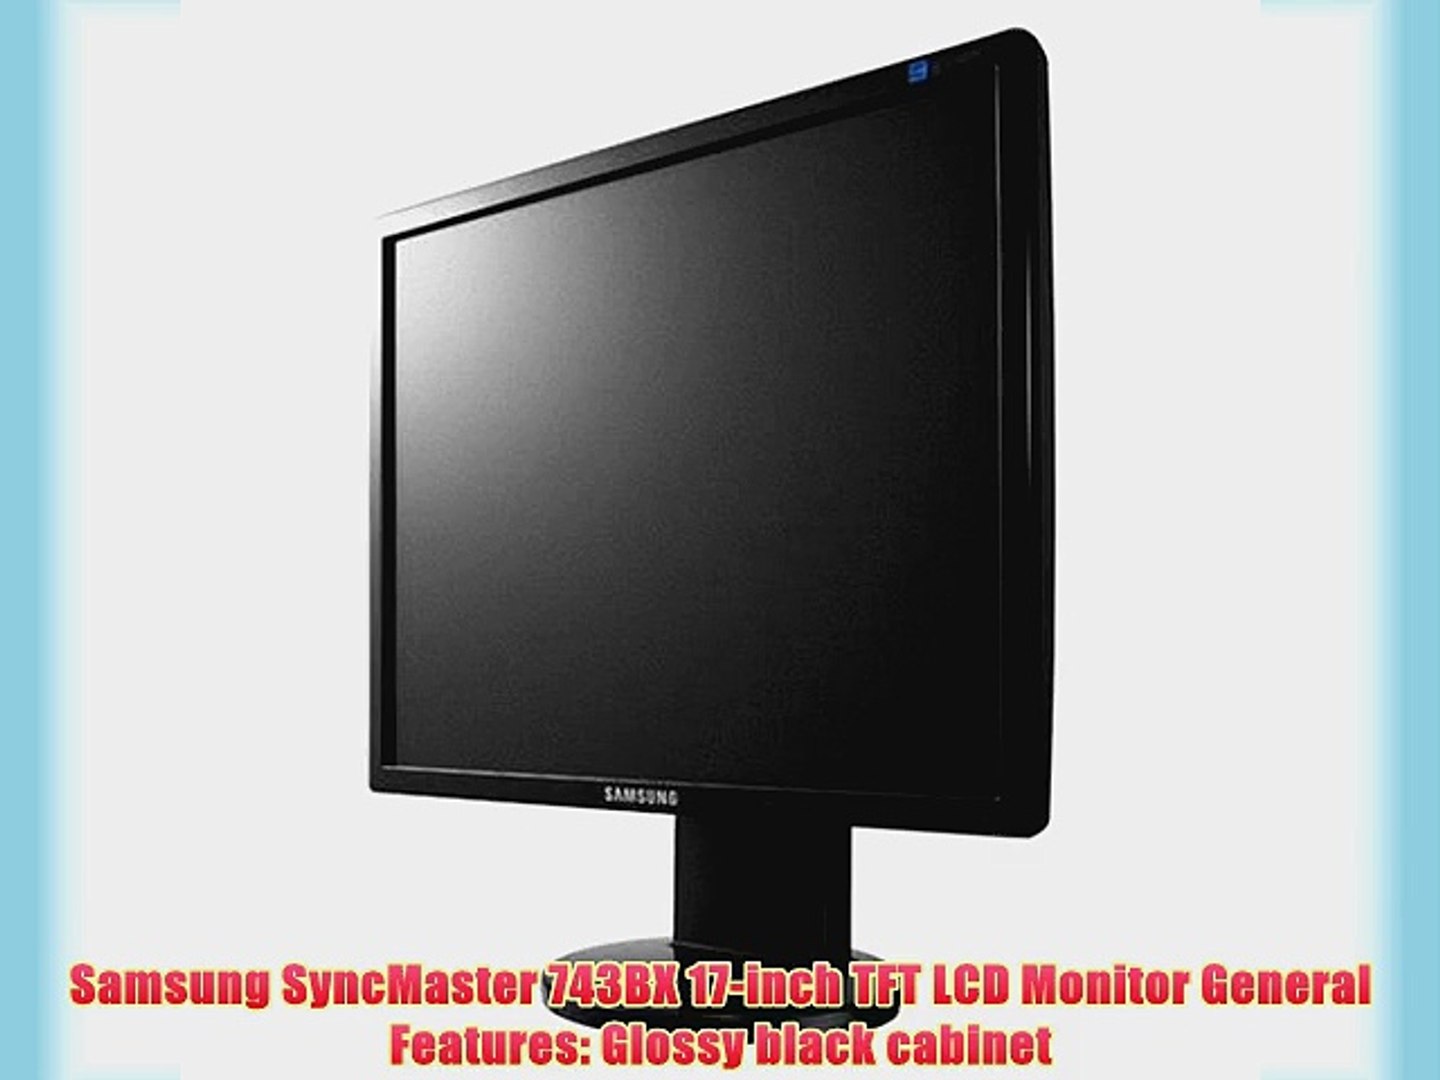 Samsung SyncMaster 743BX 17-inch LCD Monitor - video Dailymotion